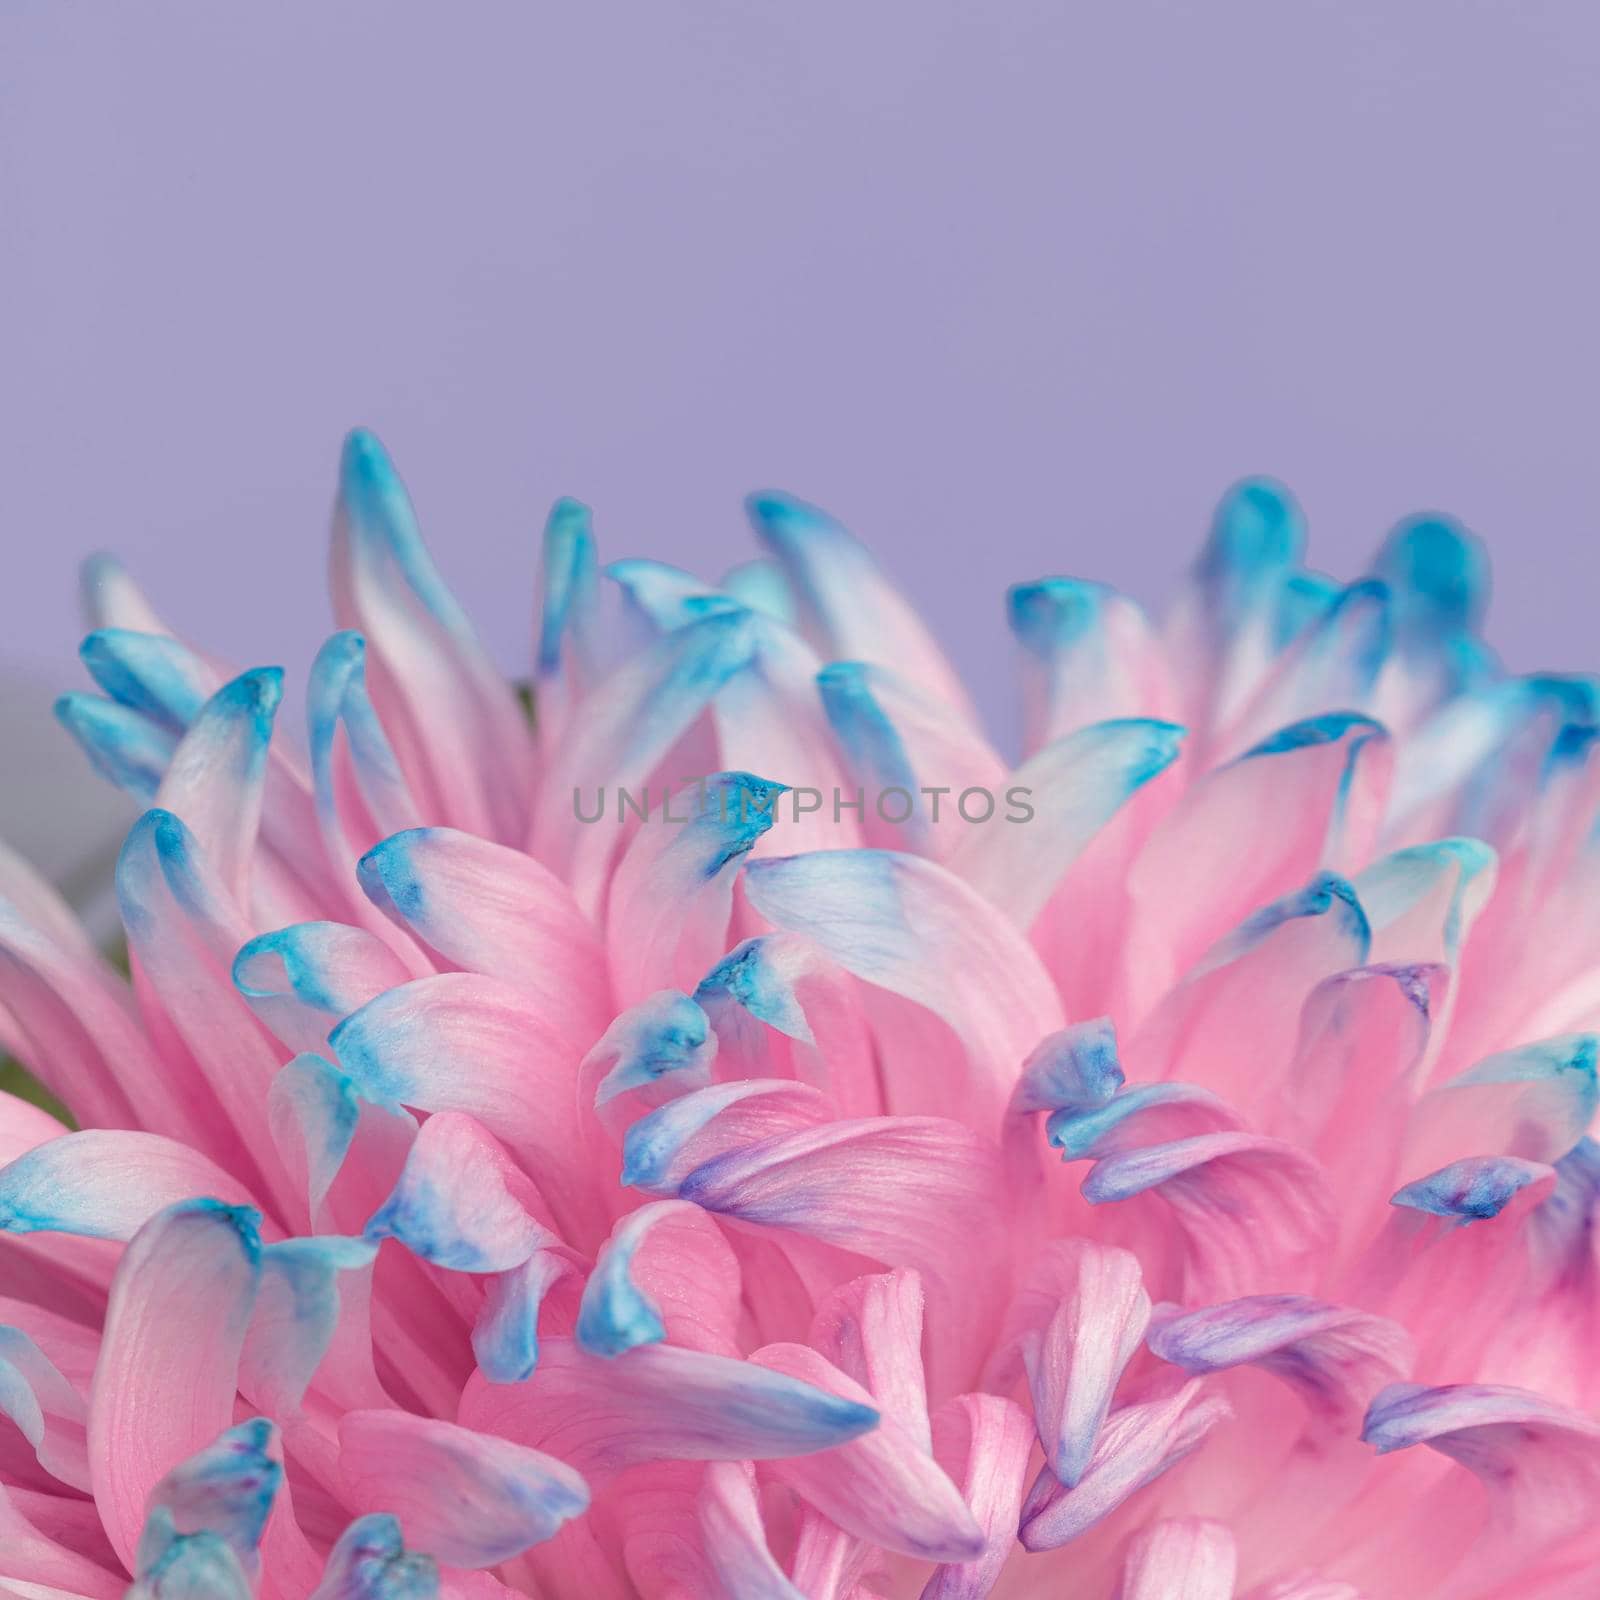 close up pretty pink blue flower. High quality photo by Zahard